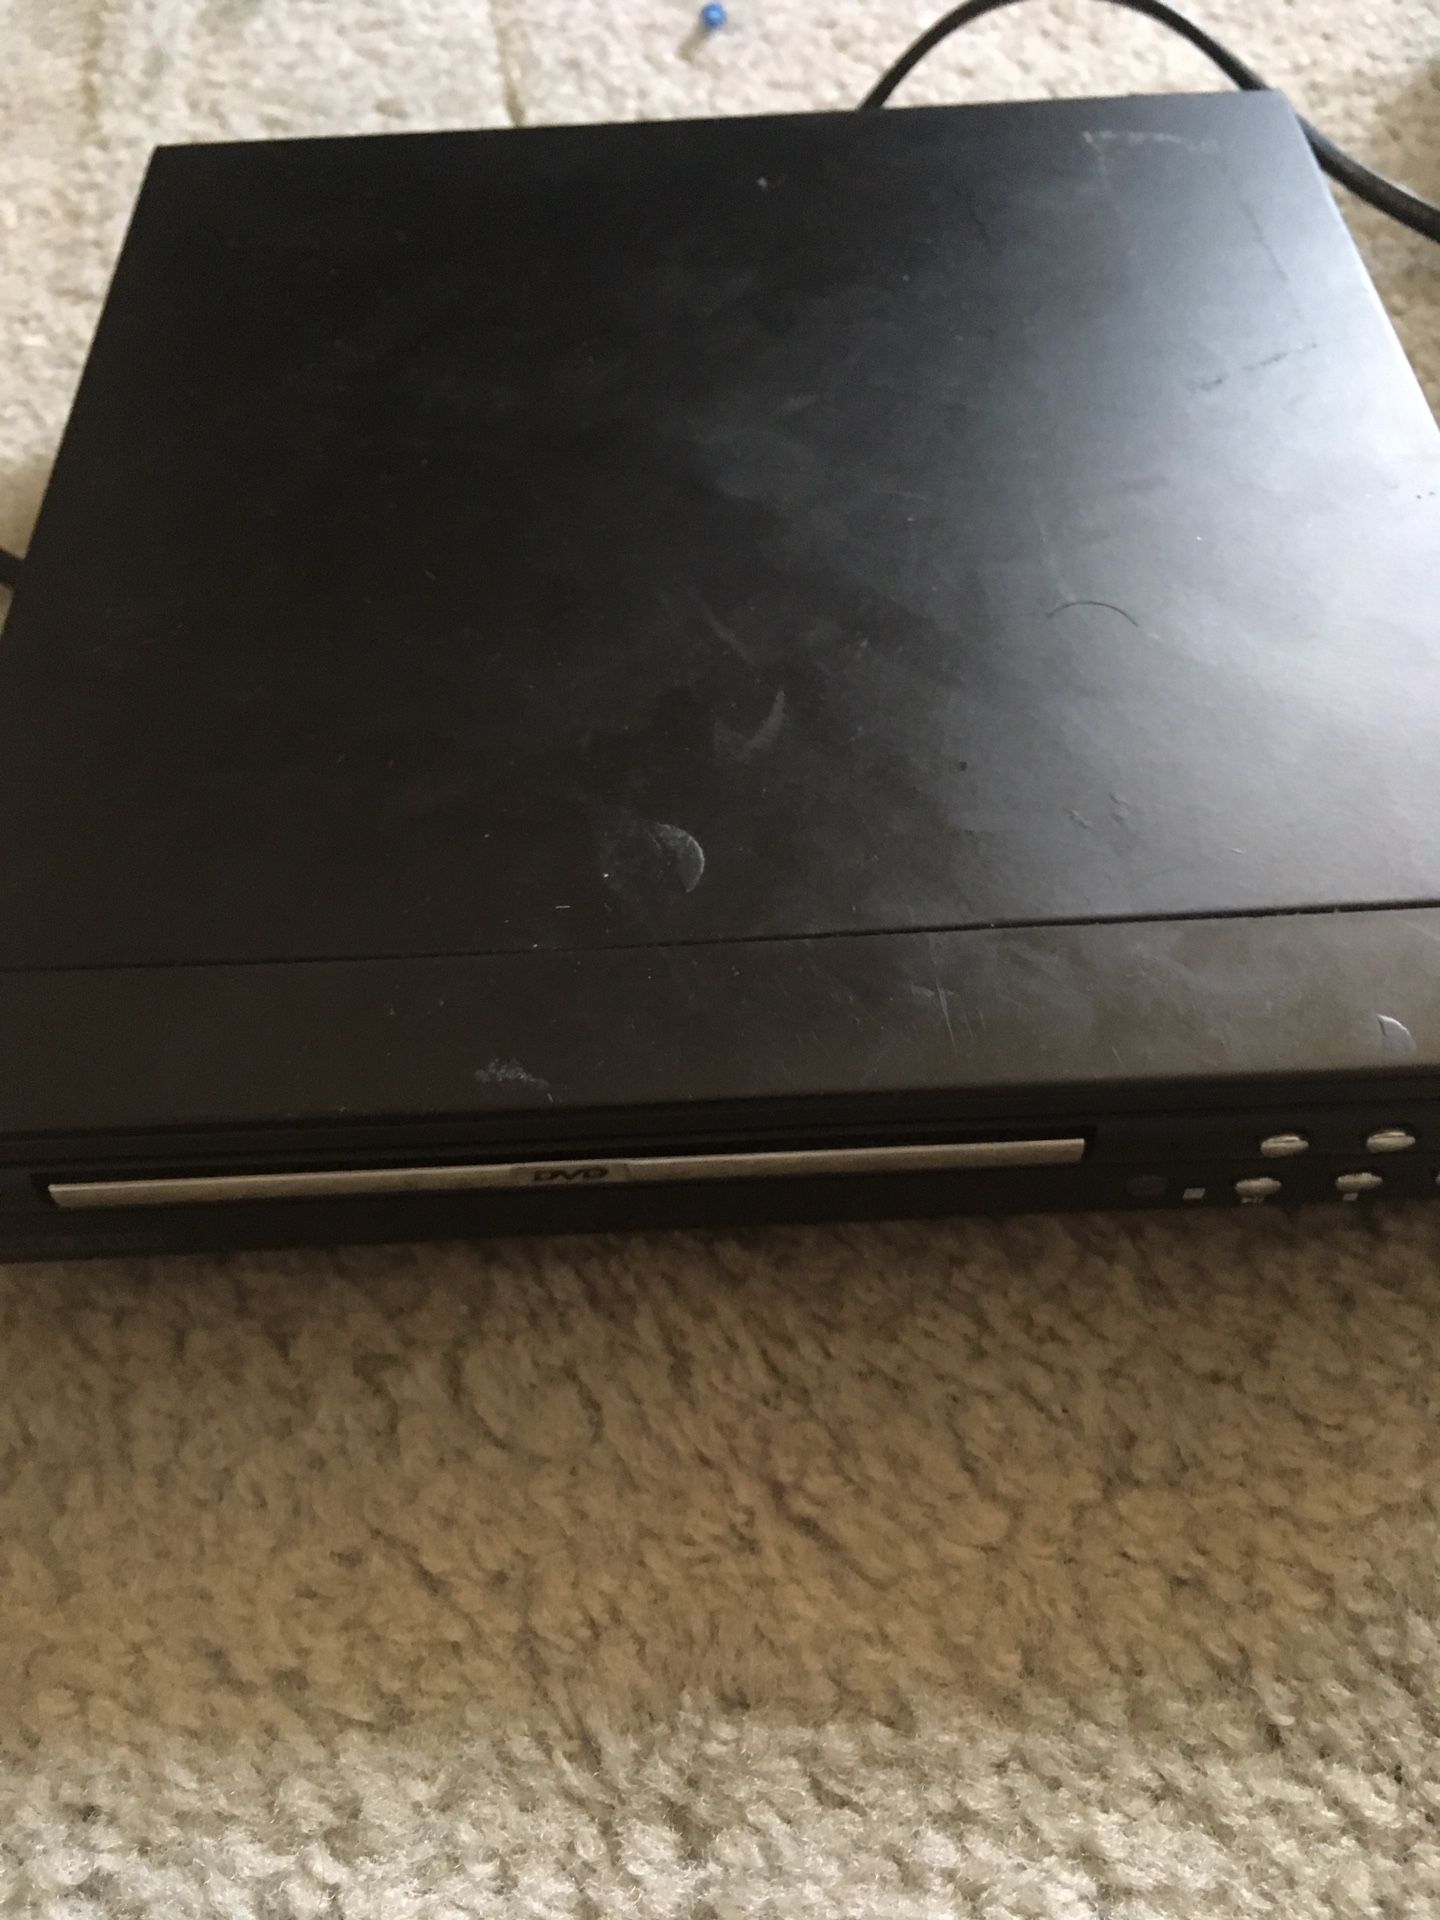 DVD Player Move out Sale!